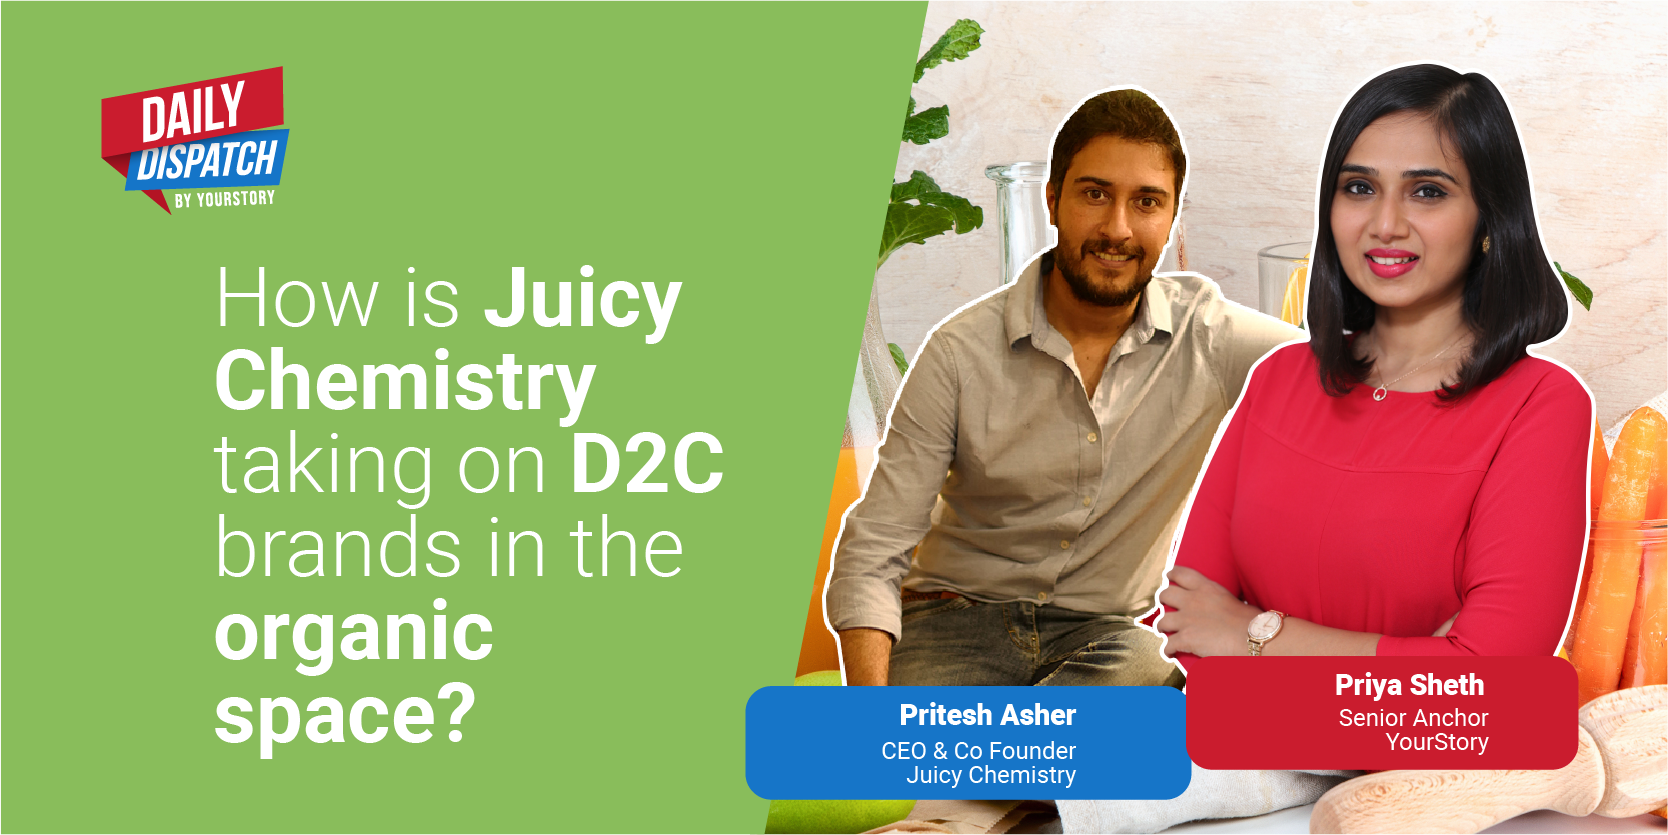 Juicy Chemistry targets Rs 100 Cr revenue, overseas expansion with recent $6.3M fundraise